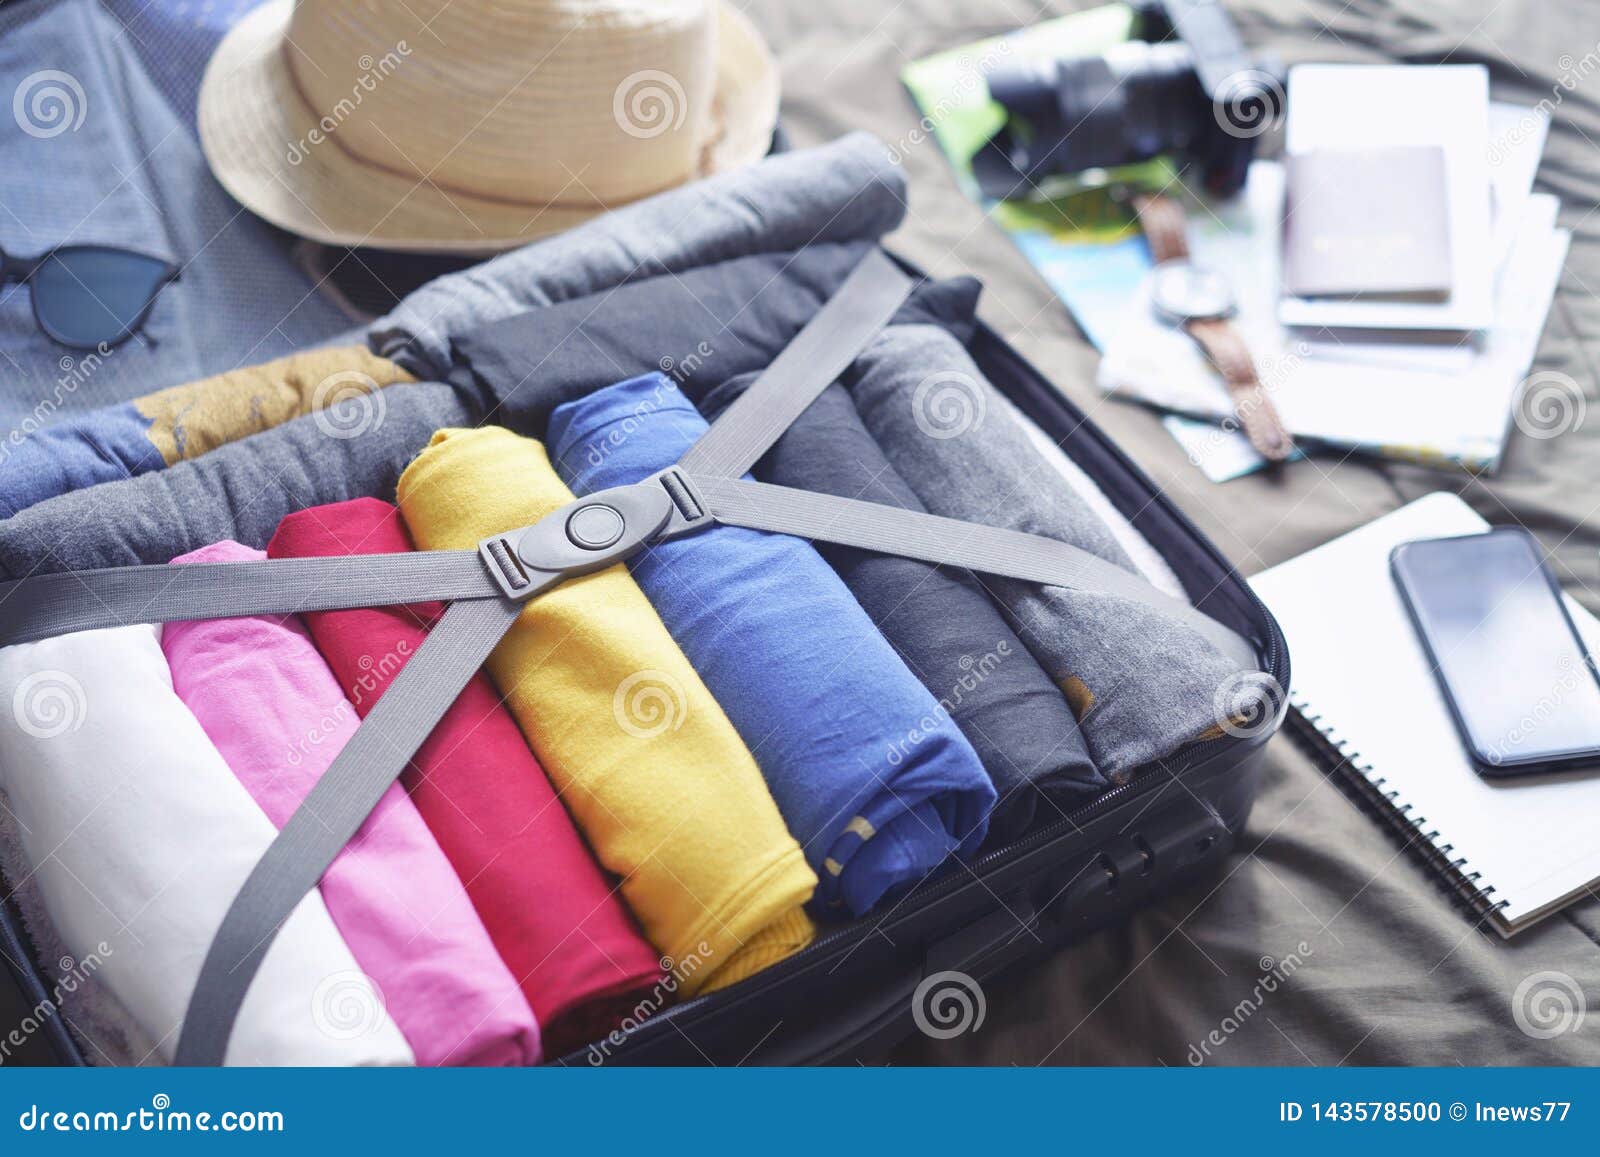 prepare accessories for new journey and travel to long weekend trip, packing clothes in suitcase bag on bed